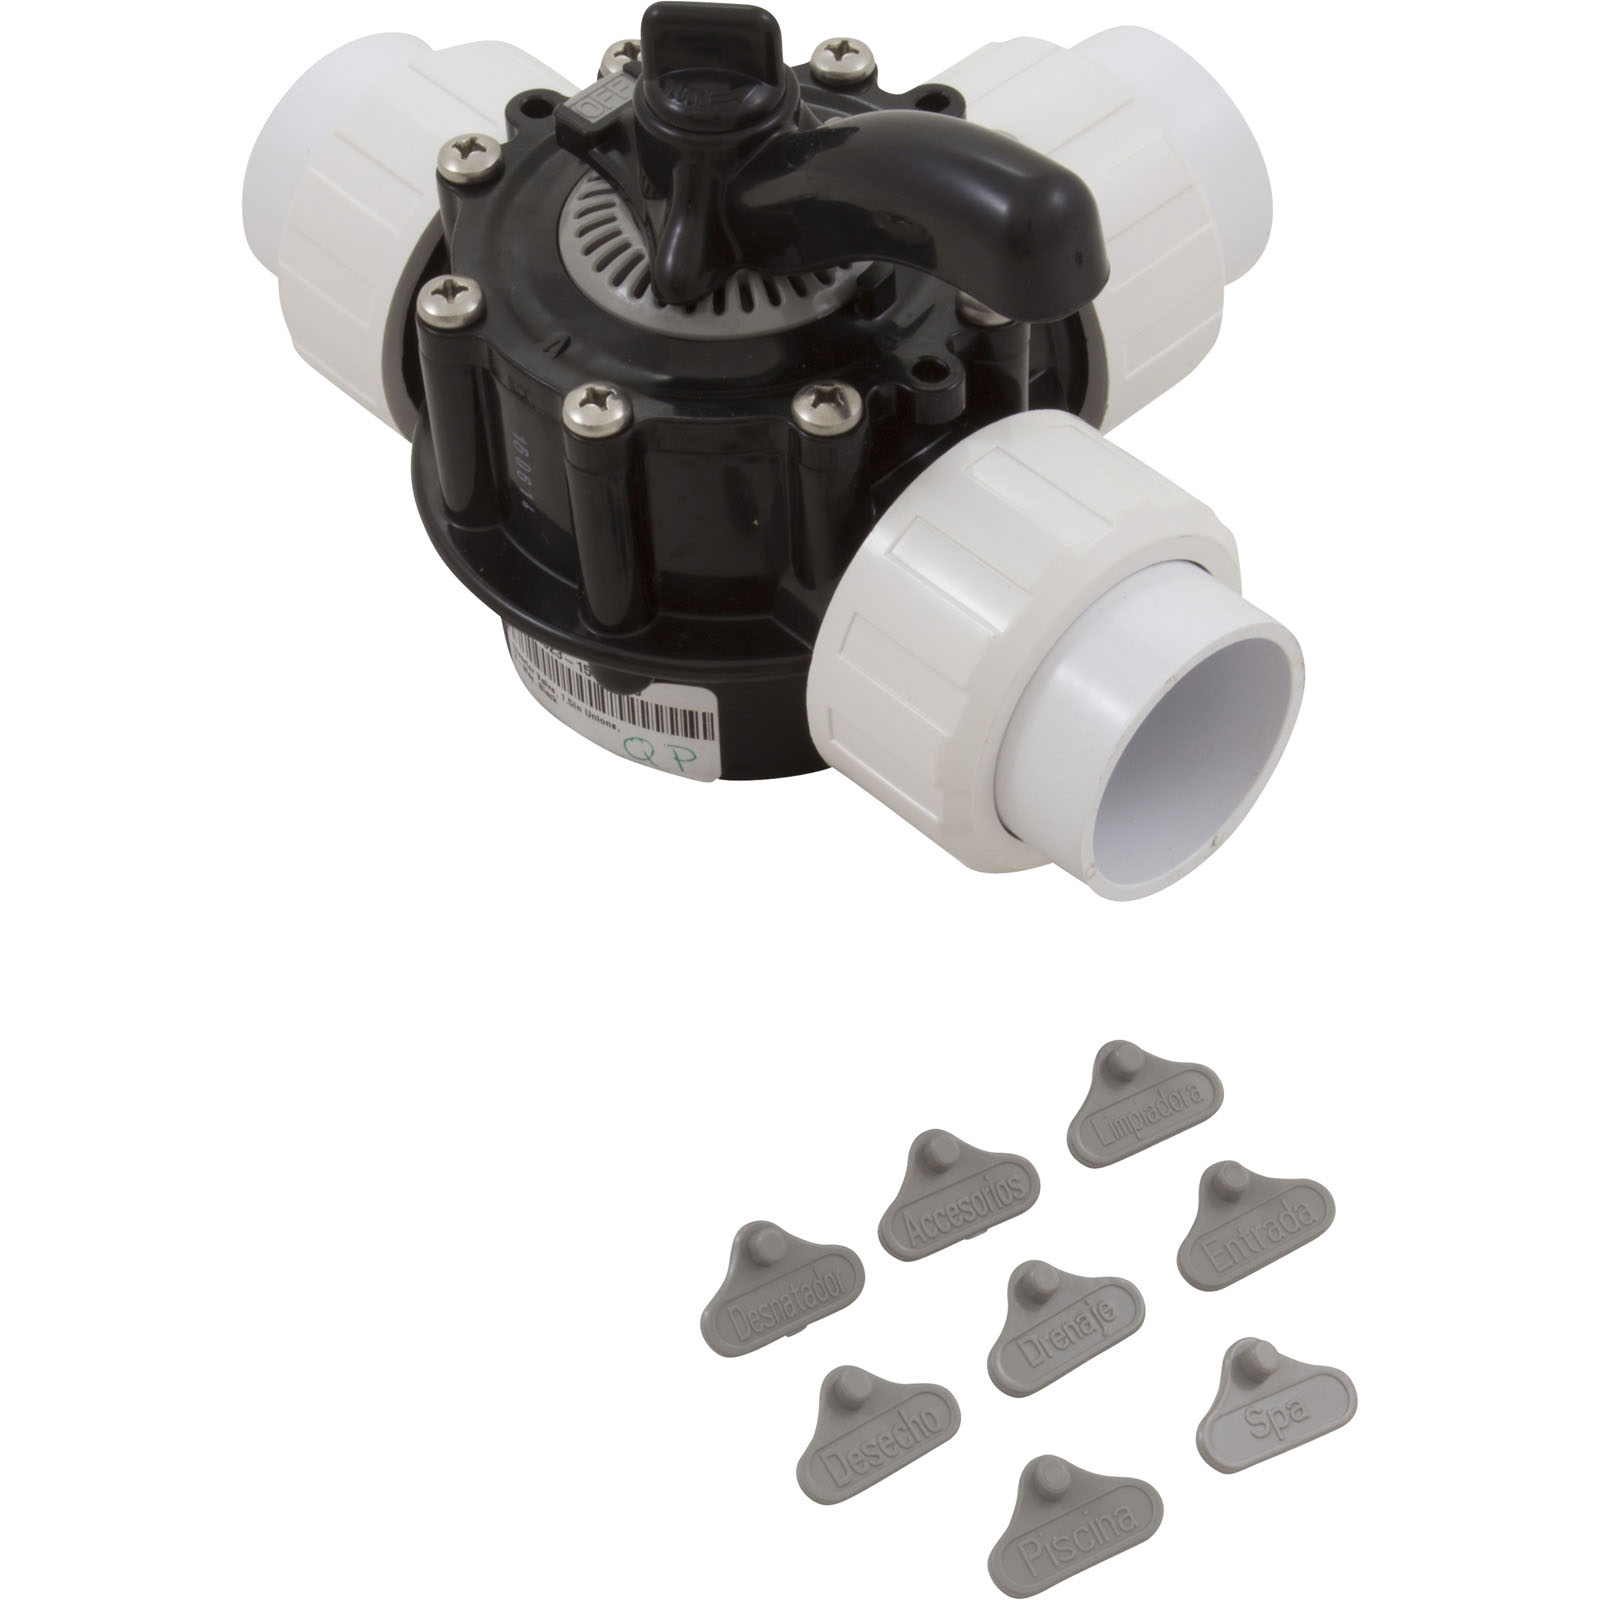 Picture of Diverter Valve, 1.5In Unions, 3-Way, Black